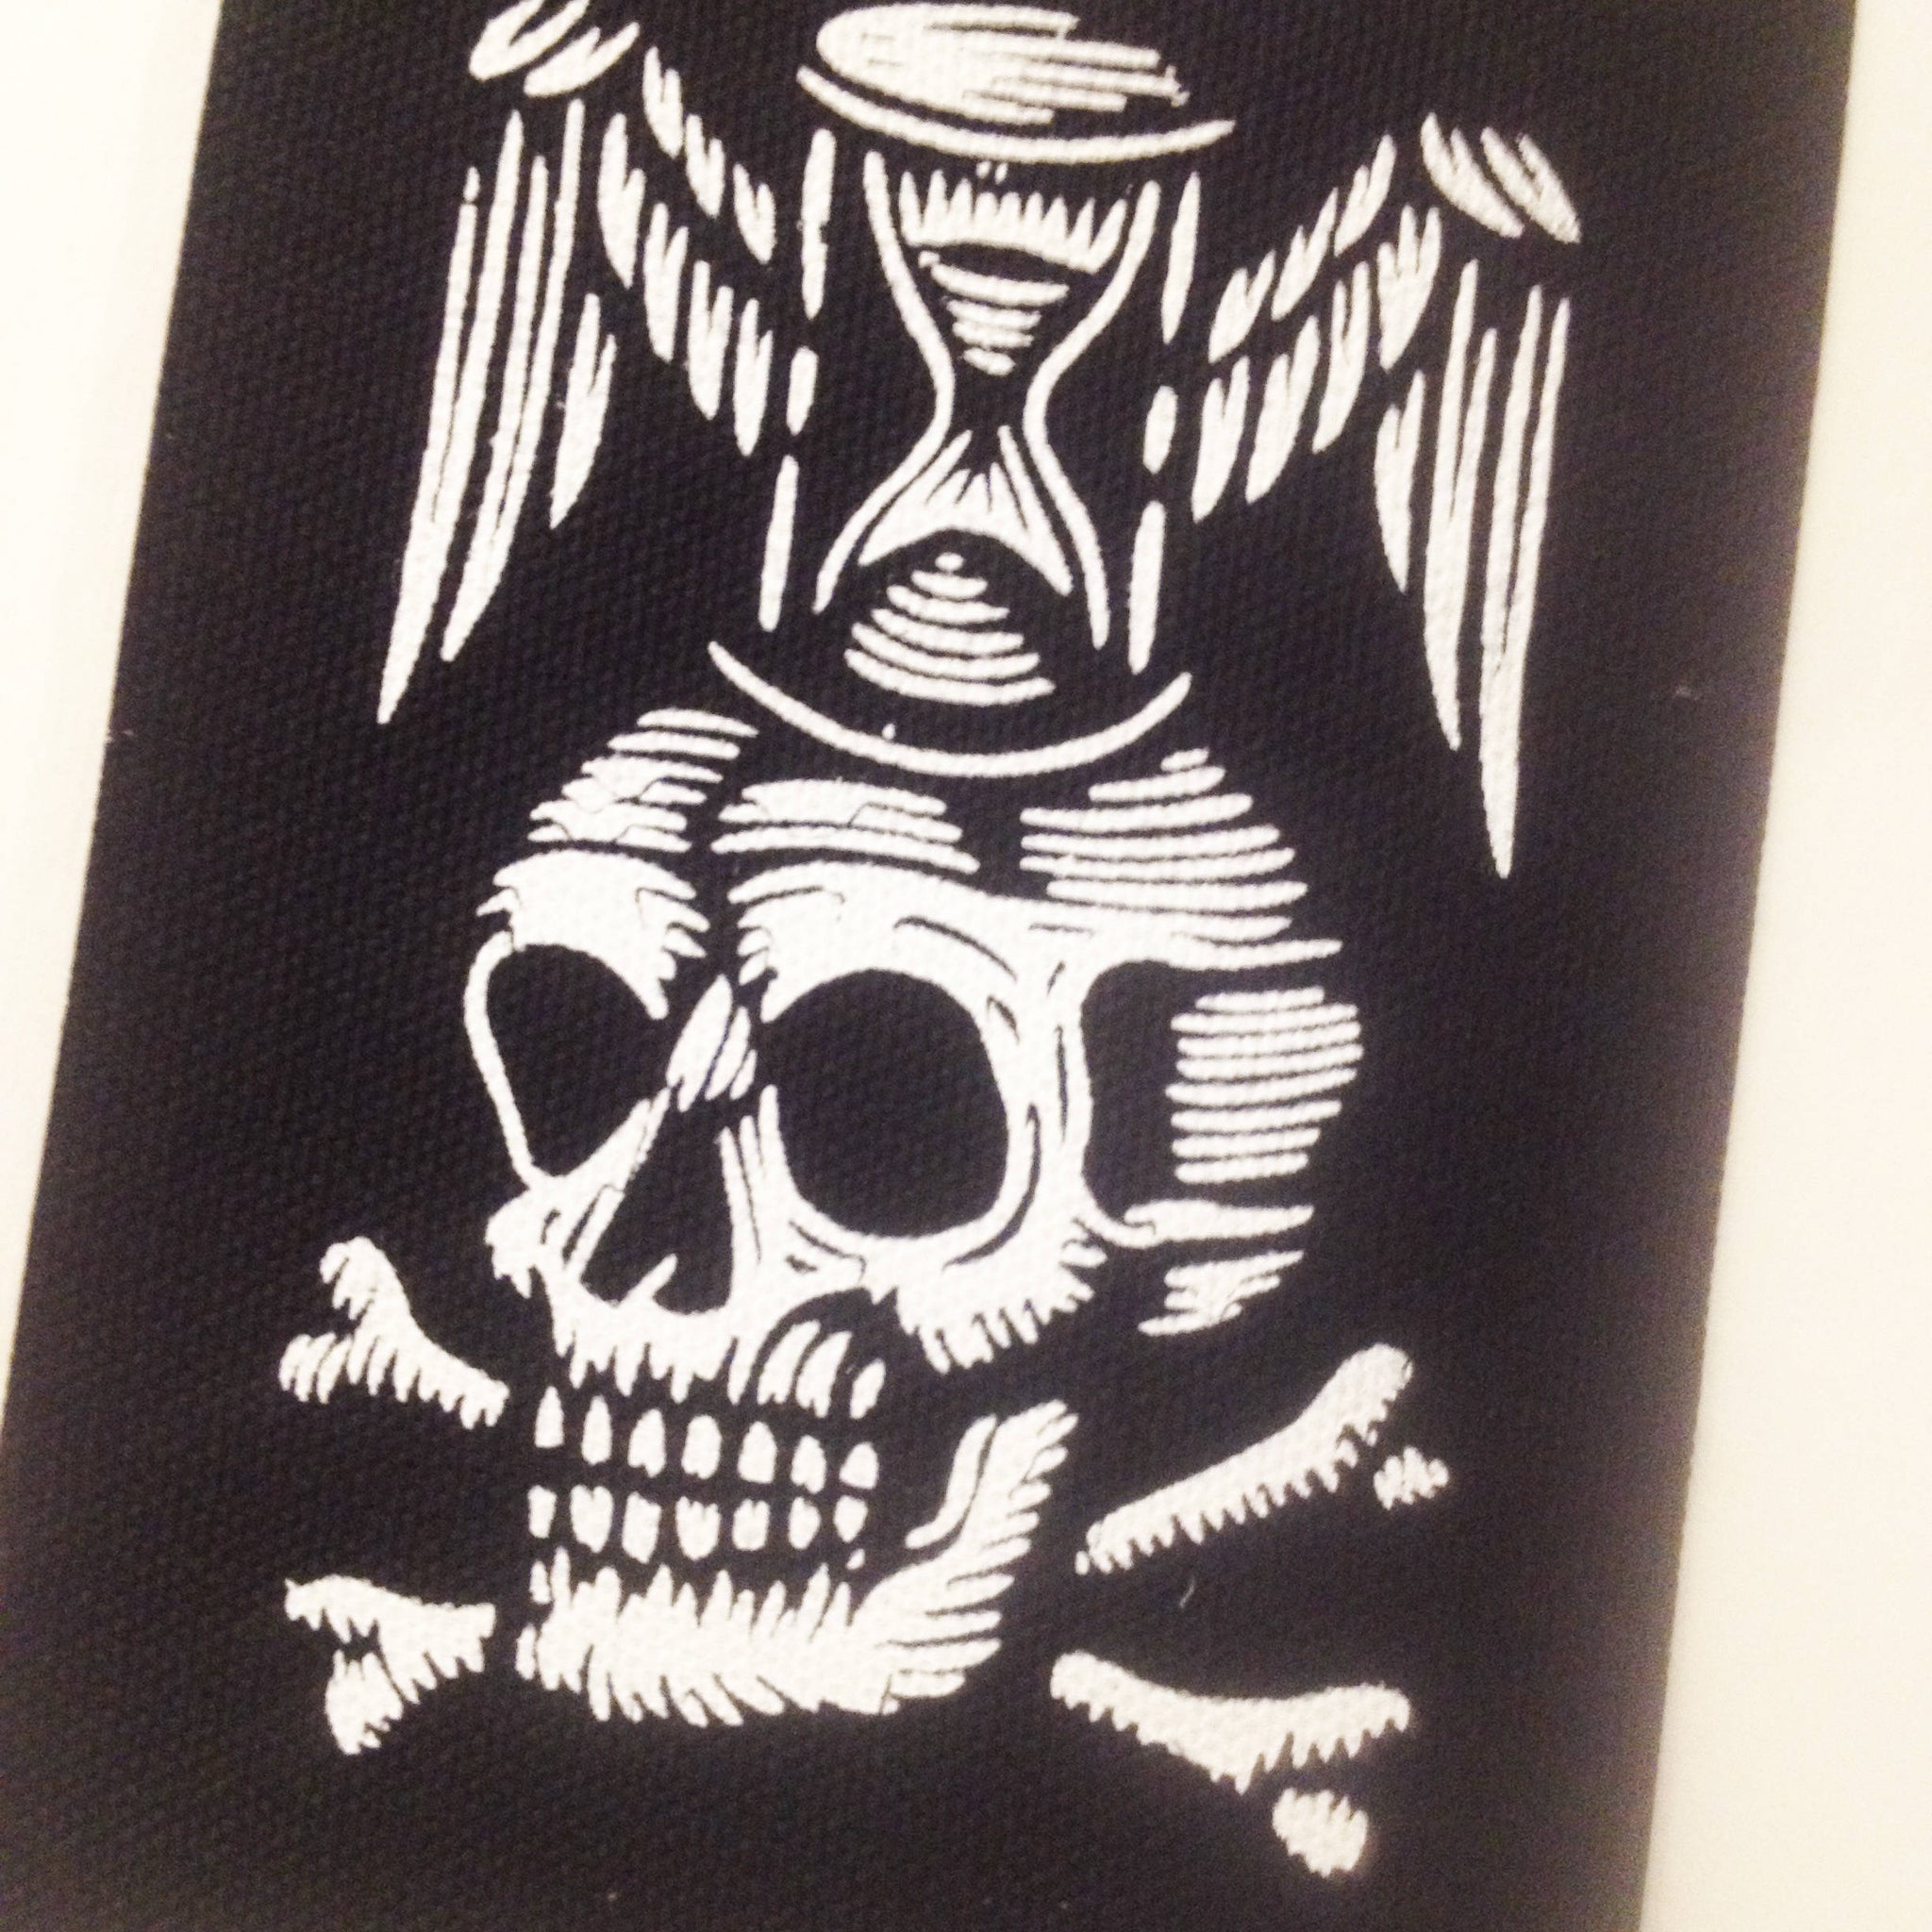 Memento Mori Embroidered Iron on Patch Skull Patch Mushrooms Sew on Patches  for Jackets Patches for Hats Patches for Jeans 